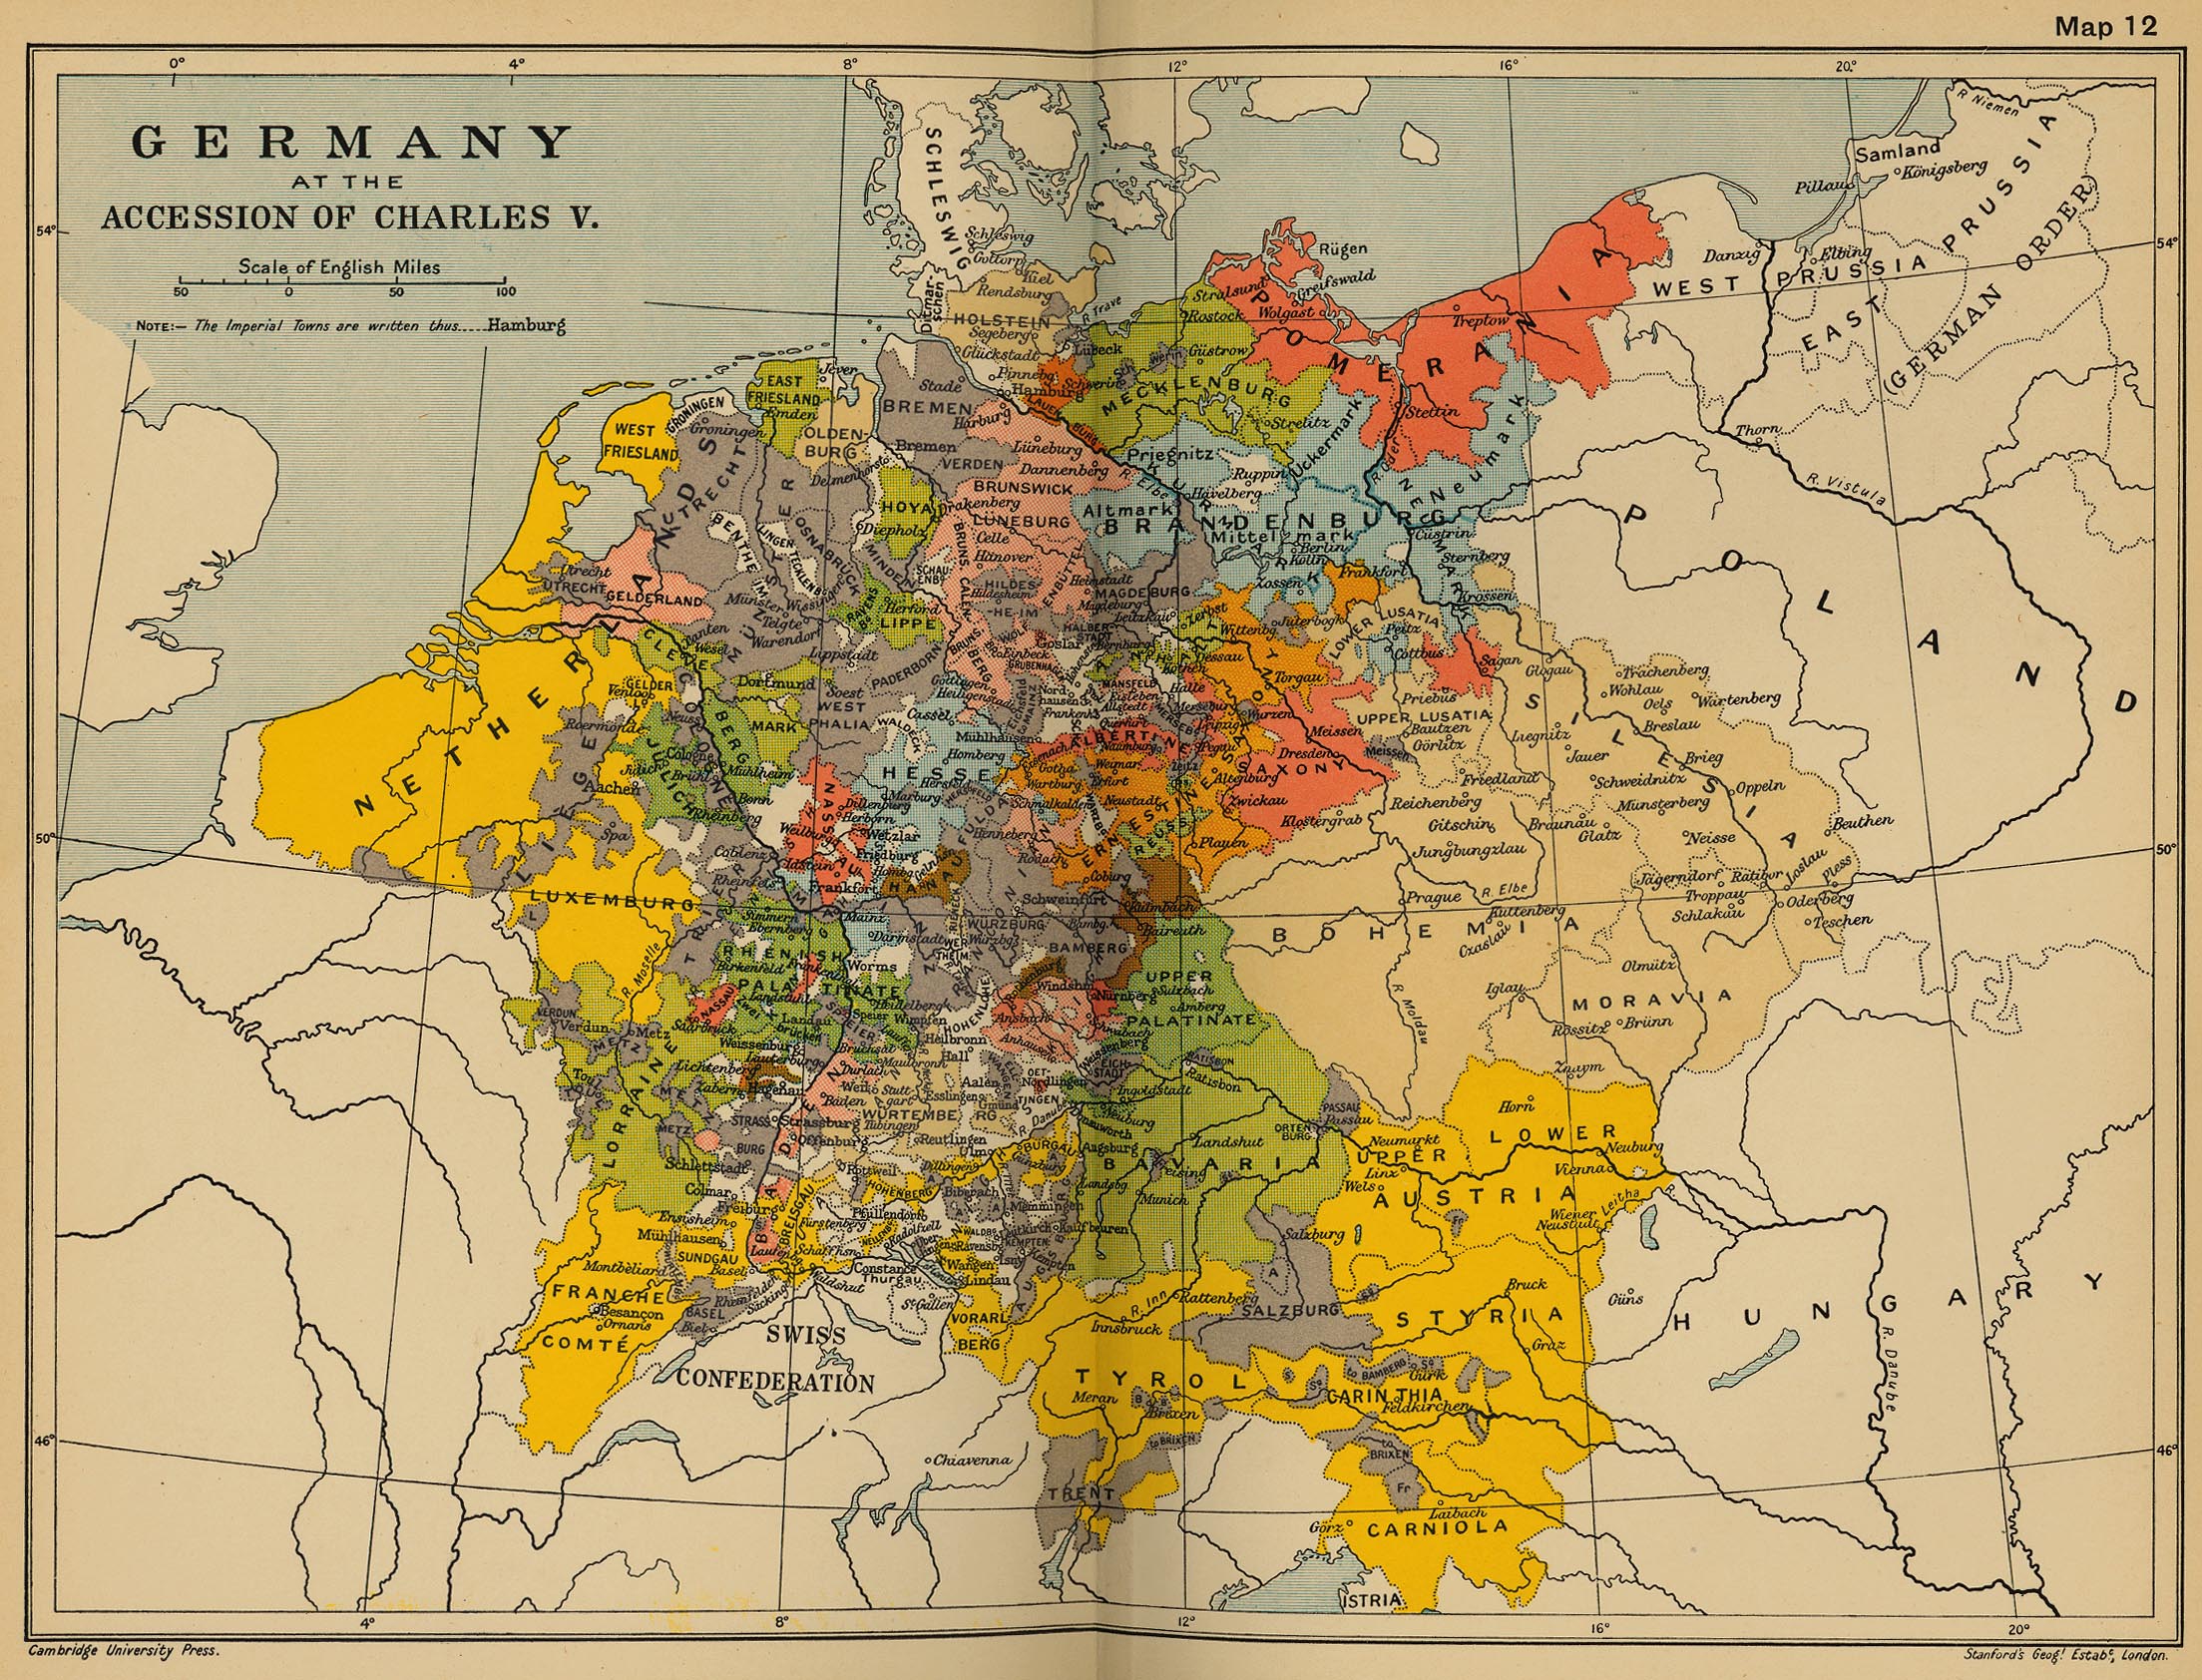 Map of Germany at the Accession of Charles V